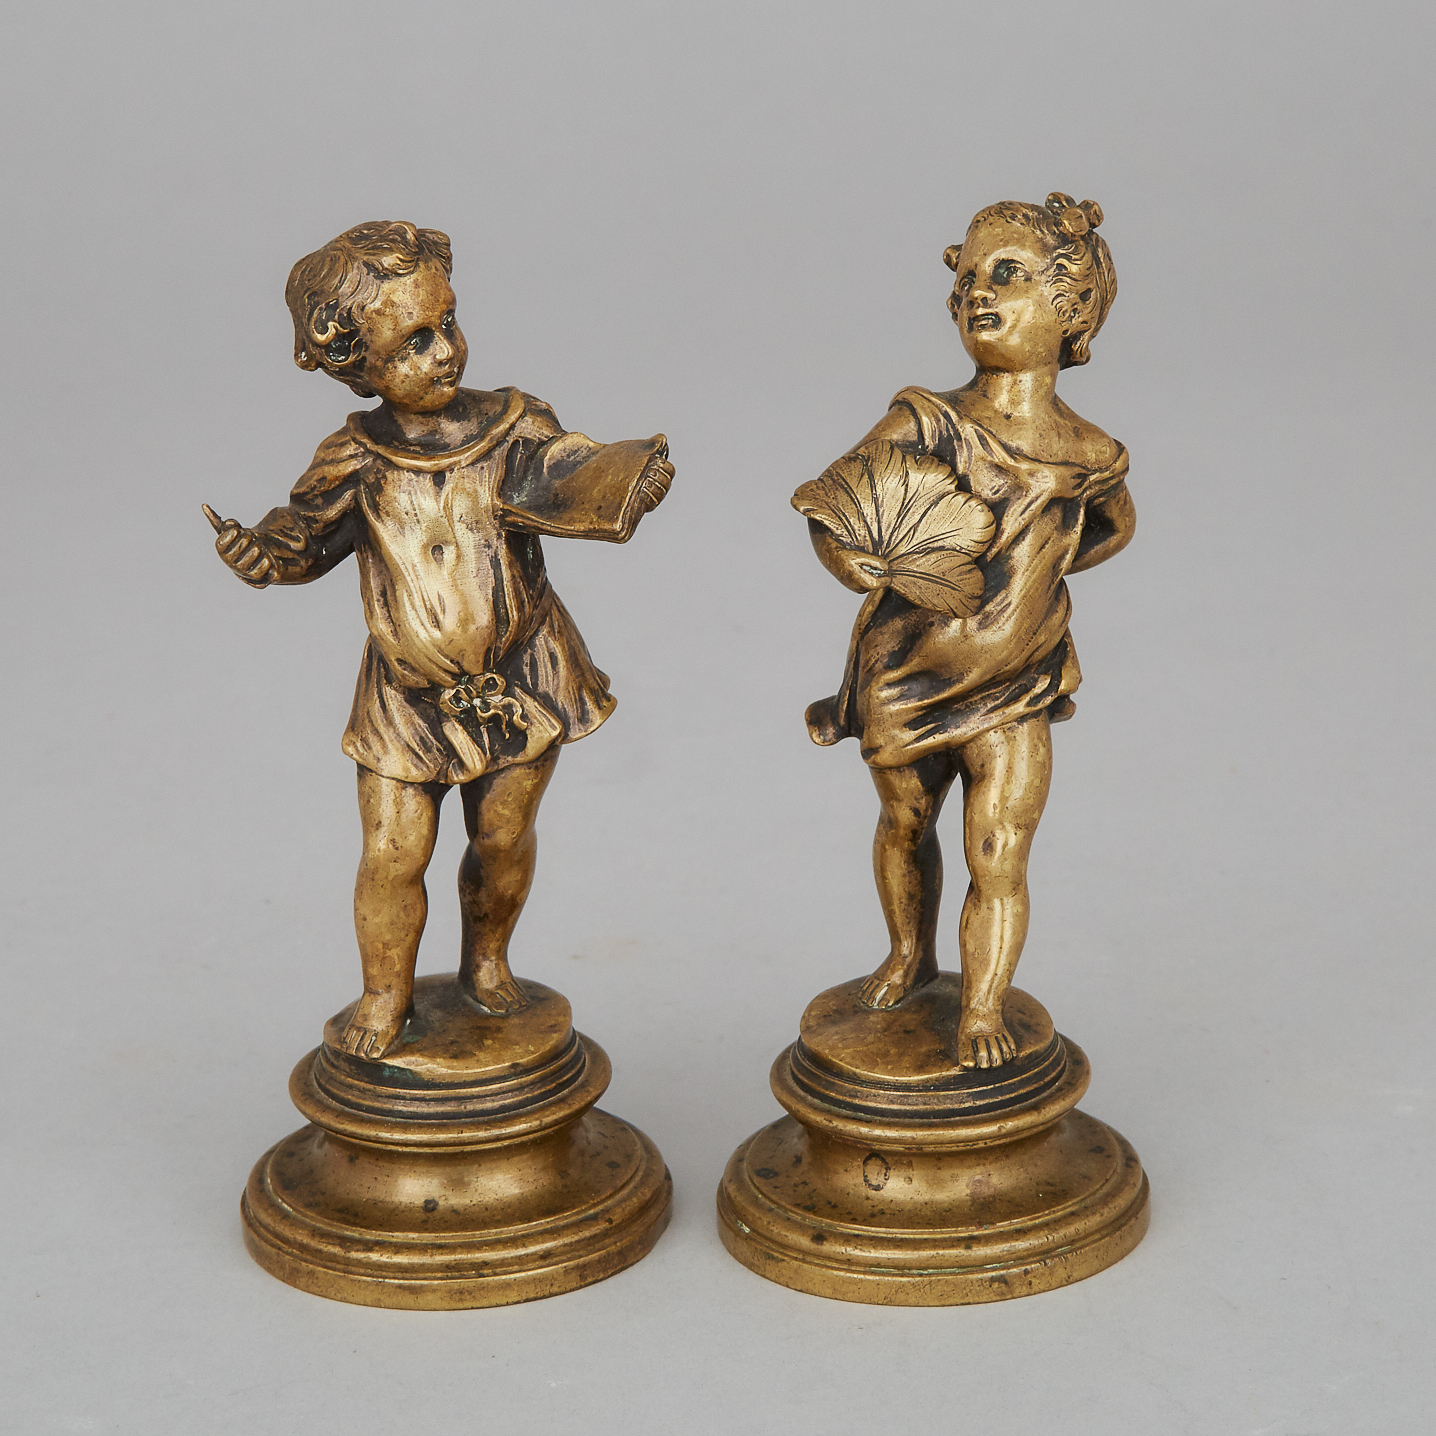 Pair of Small French Gilt Bronze Figures of Child Muses, 19th century